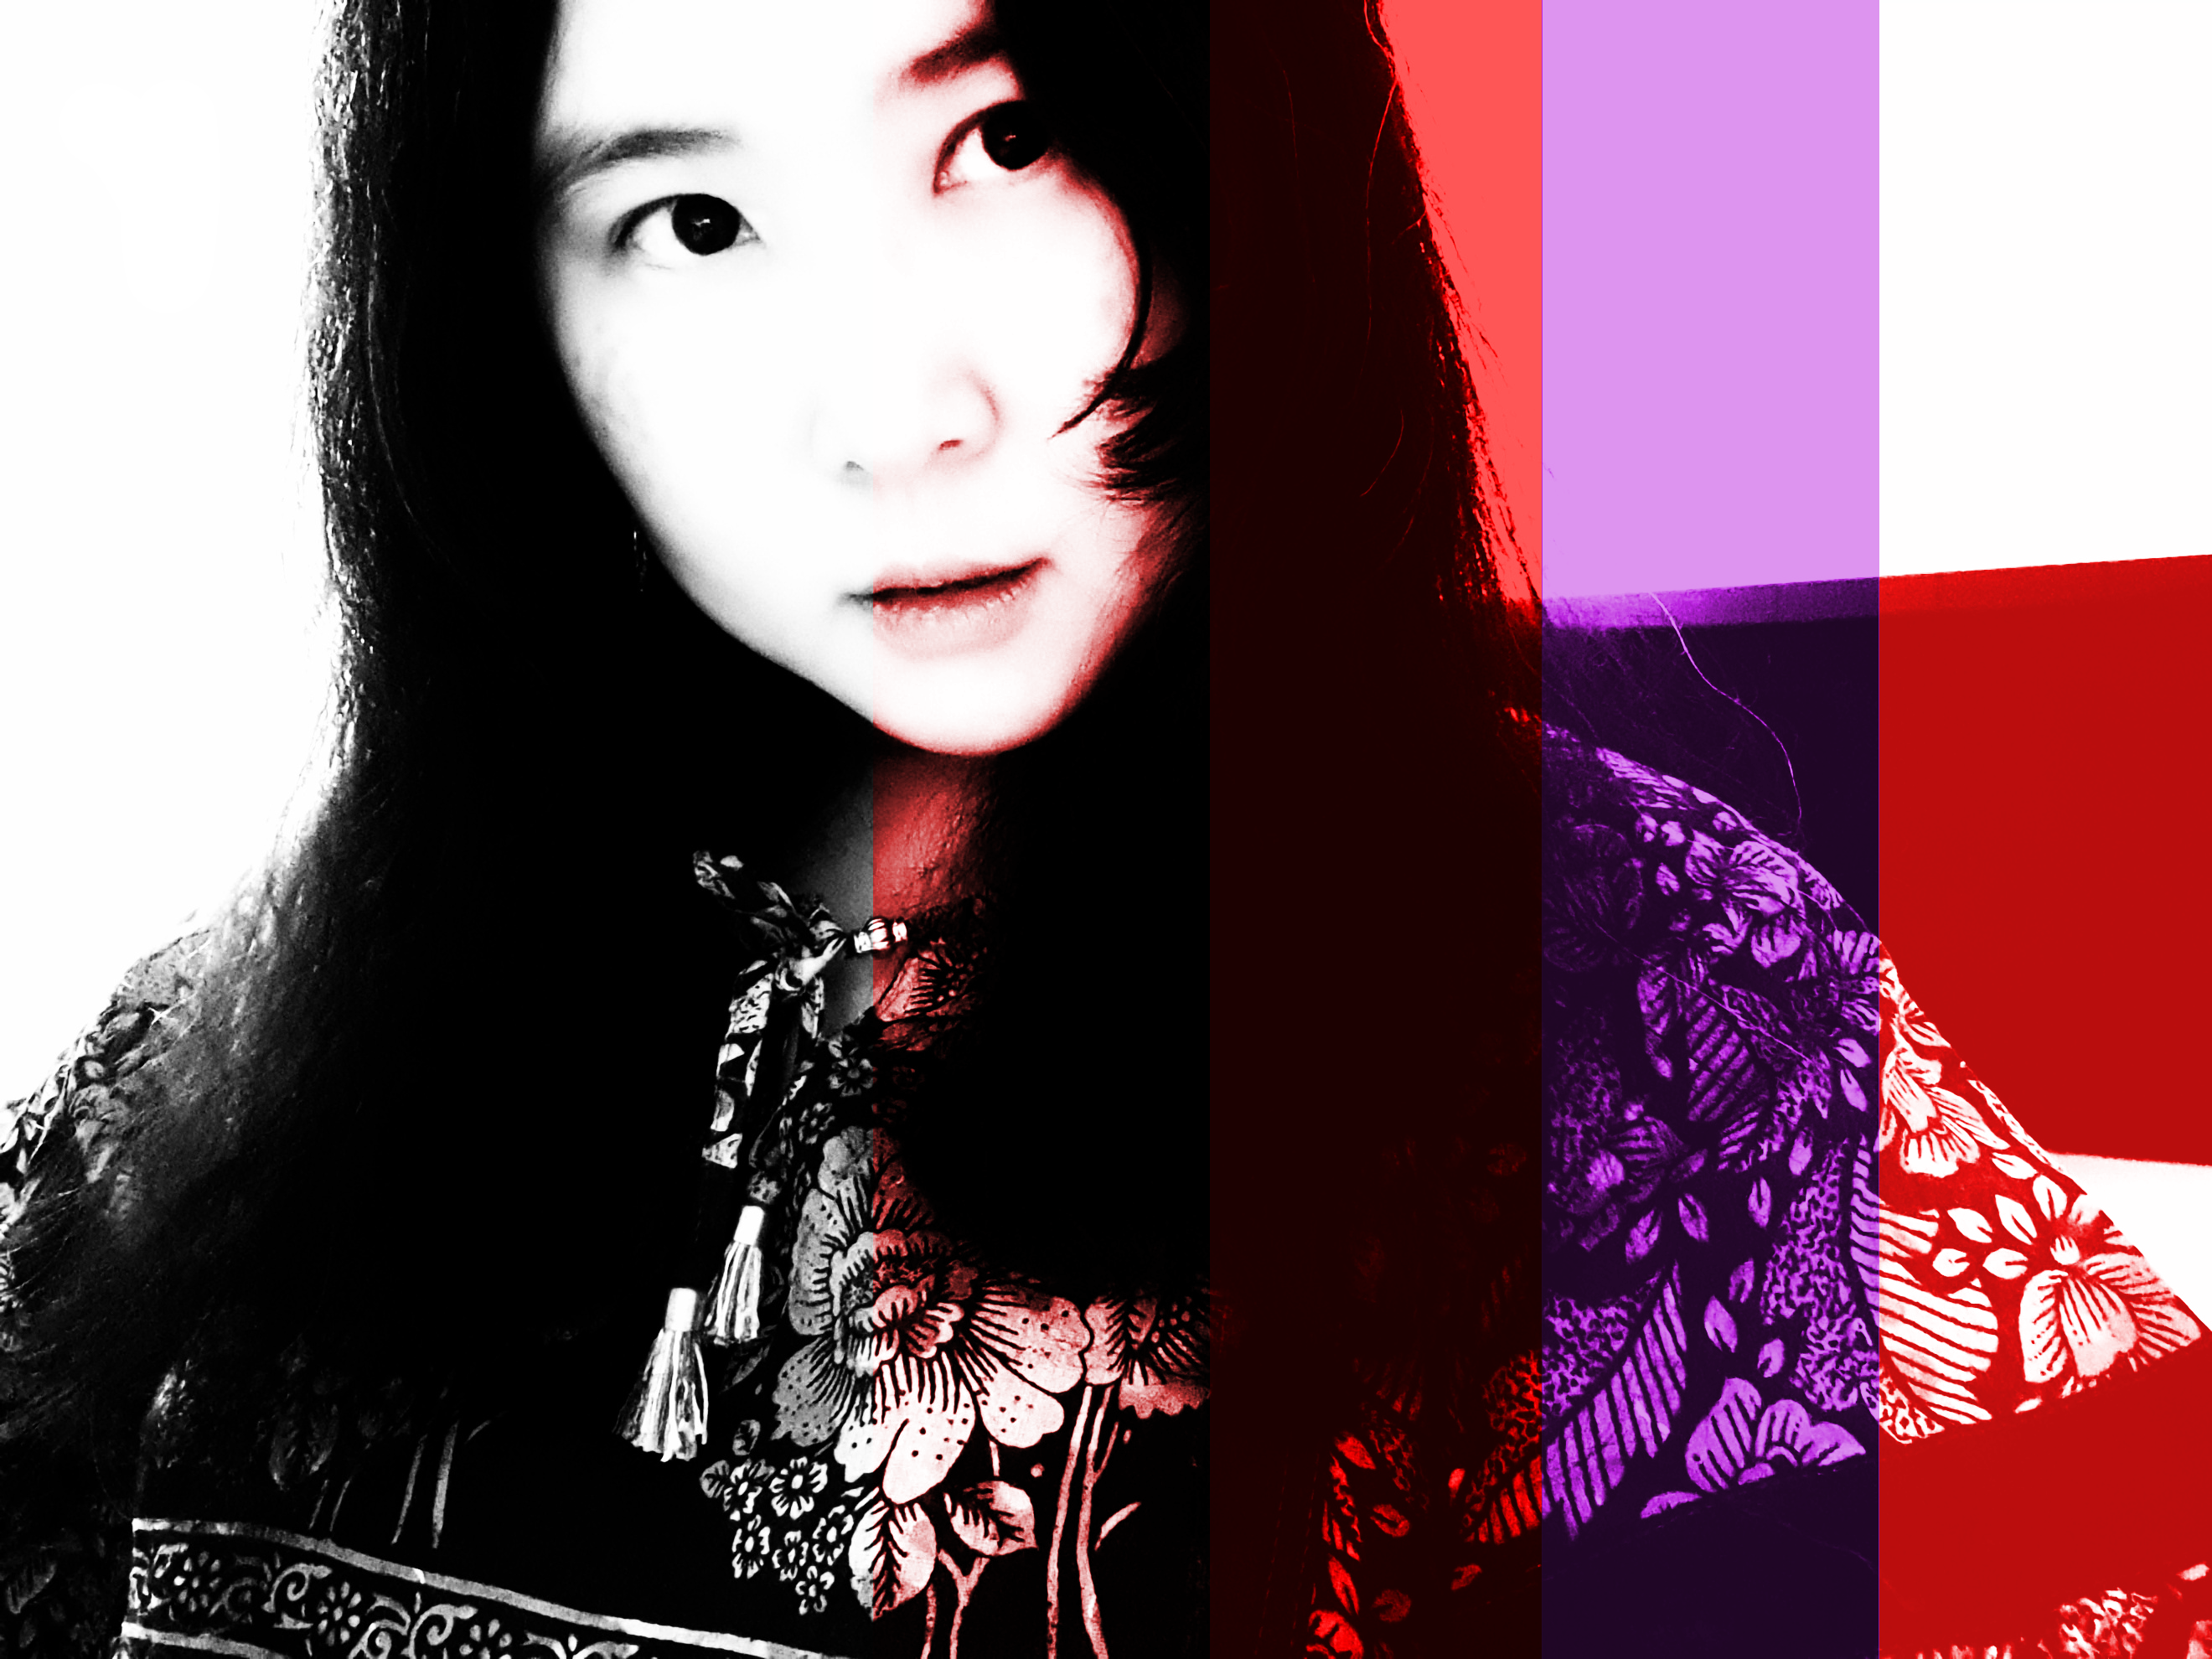 Black and white image of The Analog Girl, a singer songwriter from Singapore The image is modified with color overlays from the original.